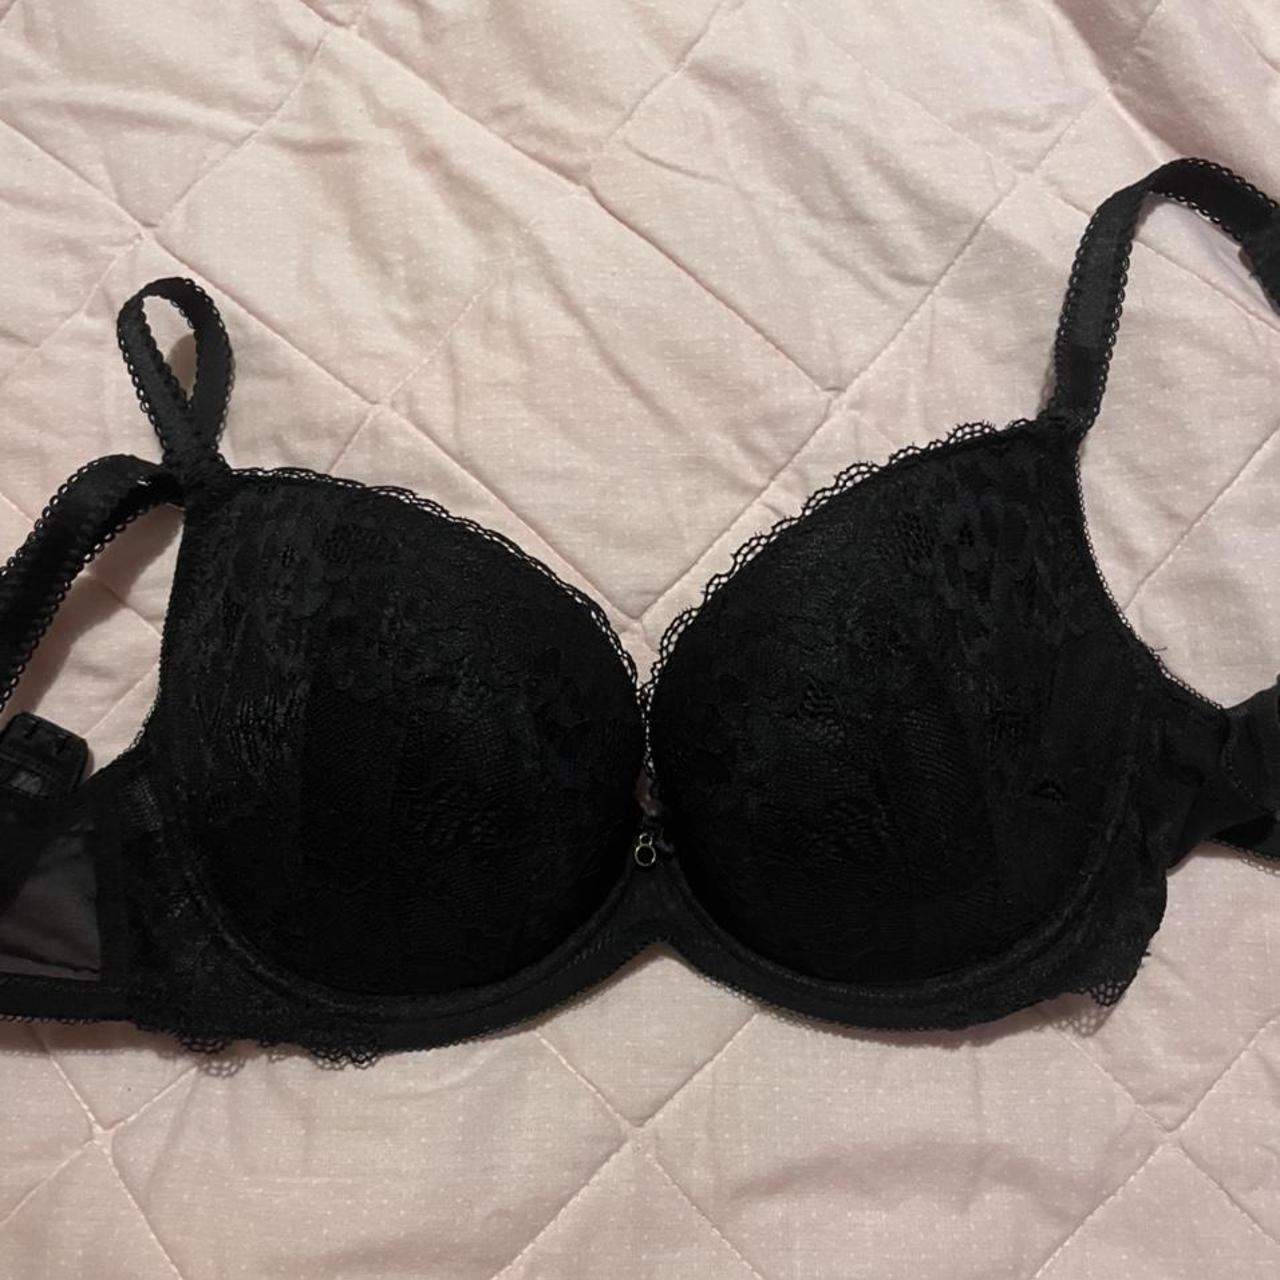 BRA 32A OR 34A BLACK LACE PINK SATIN ANN SUMMERS OPEN CUP PEEP FREEPOST  BNWT £9.99 - PicClick UK